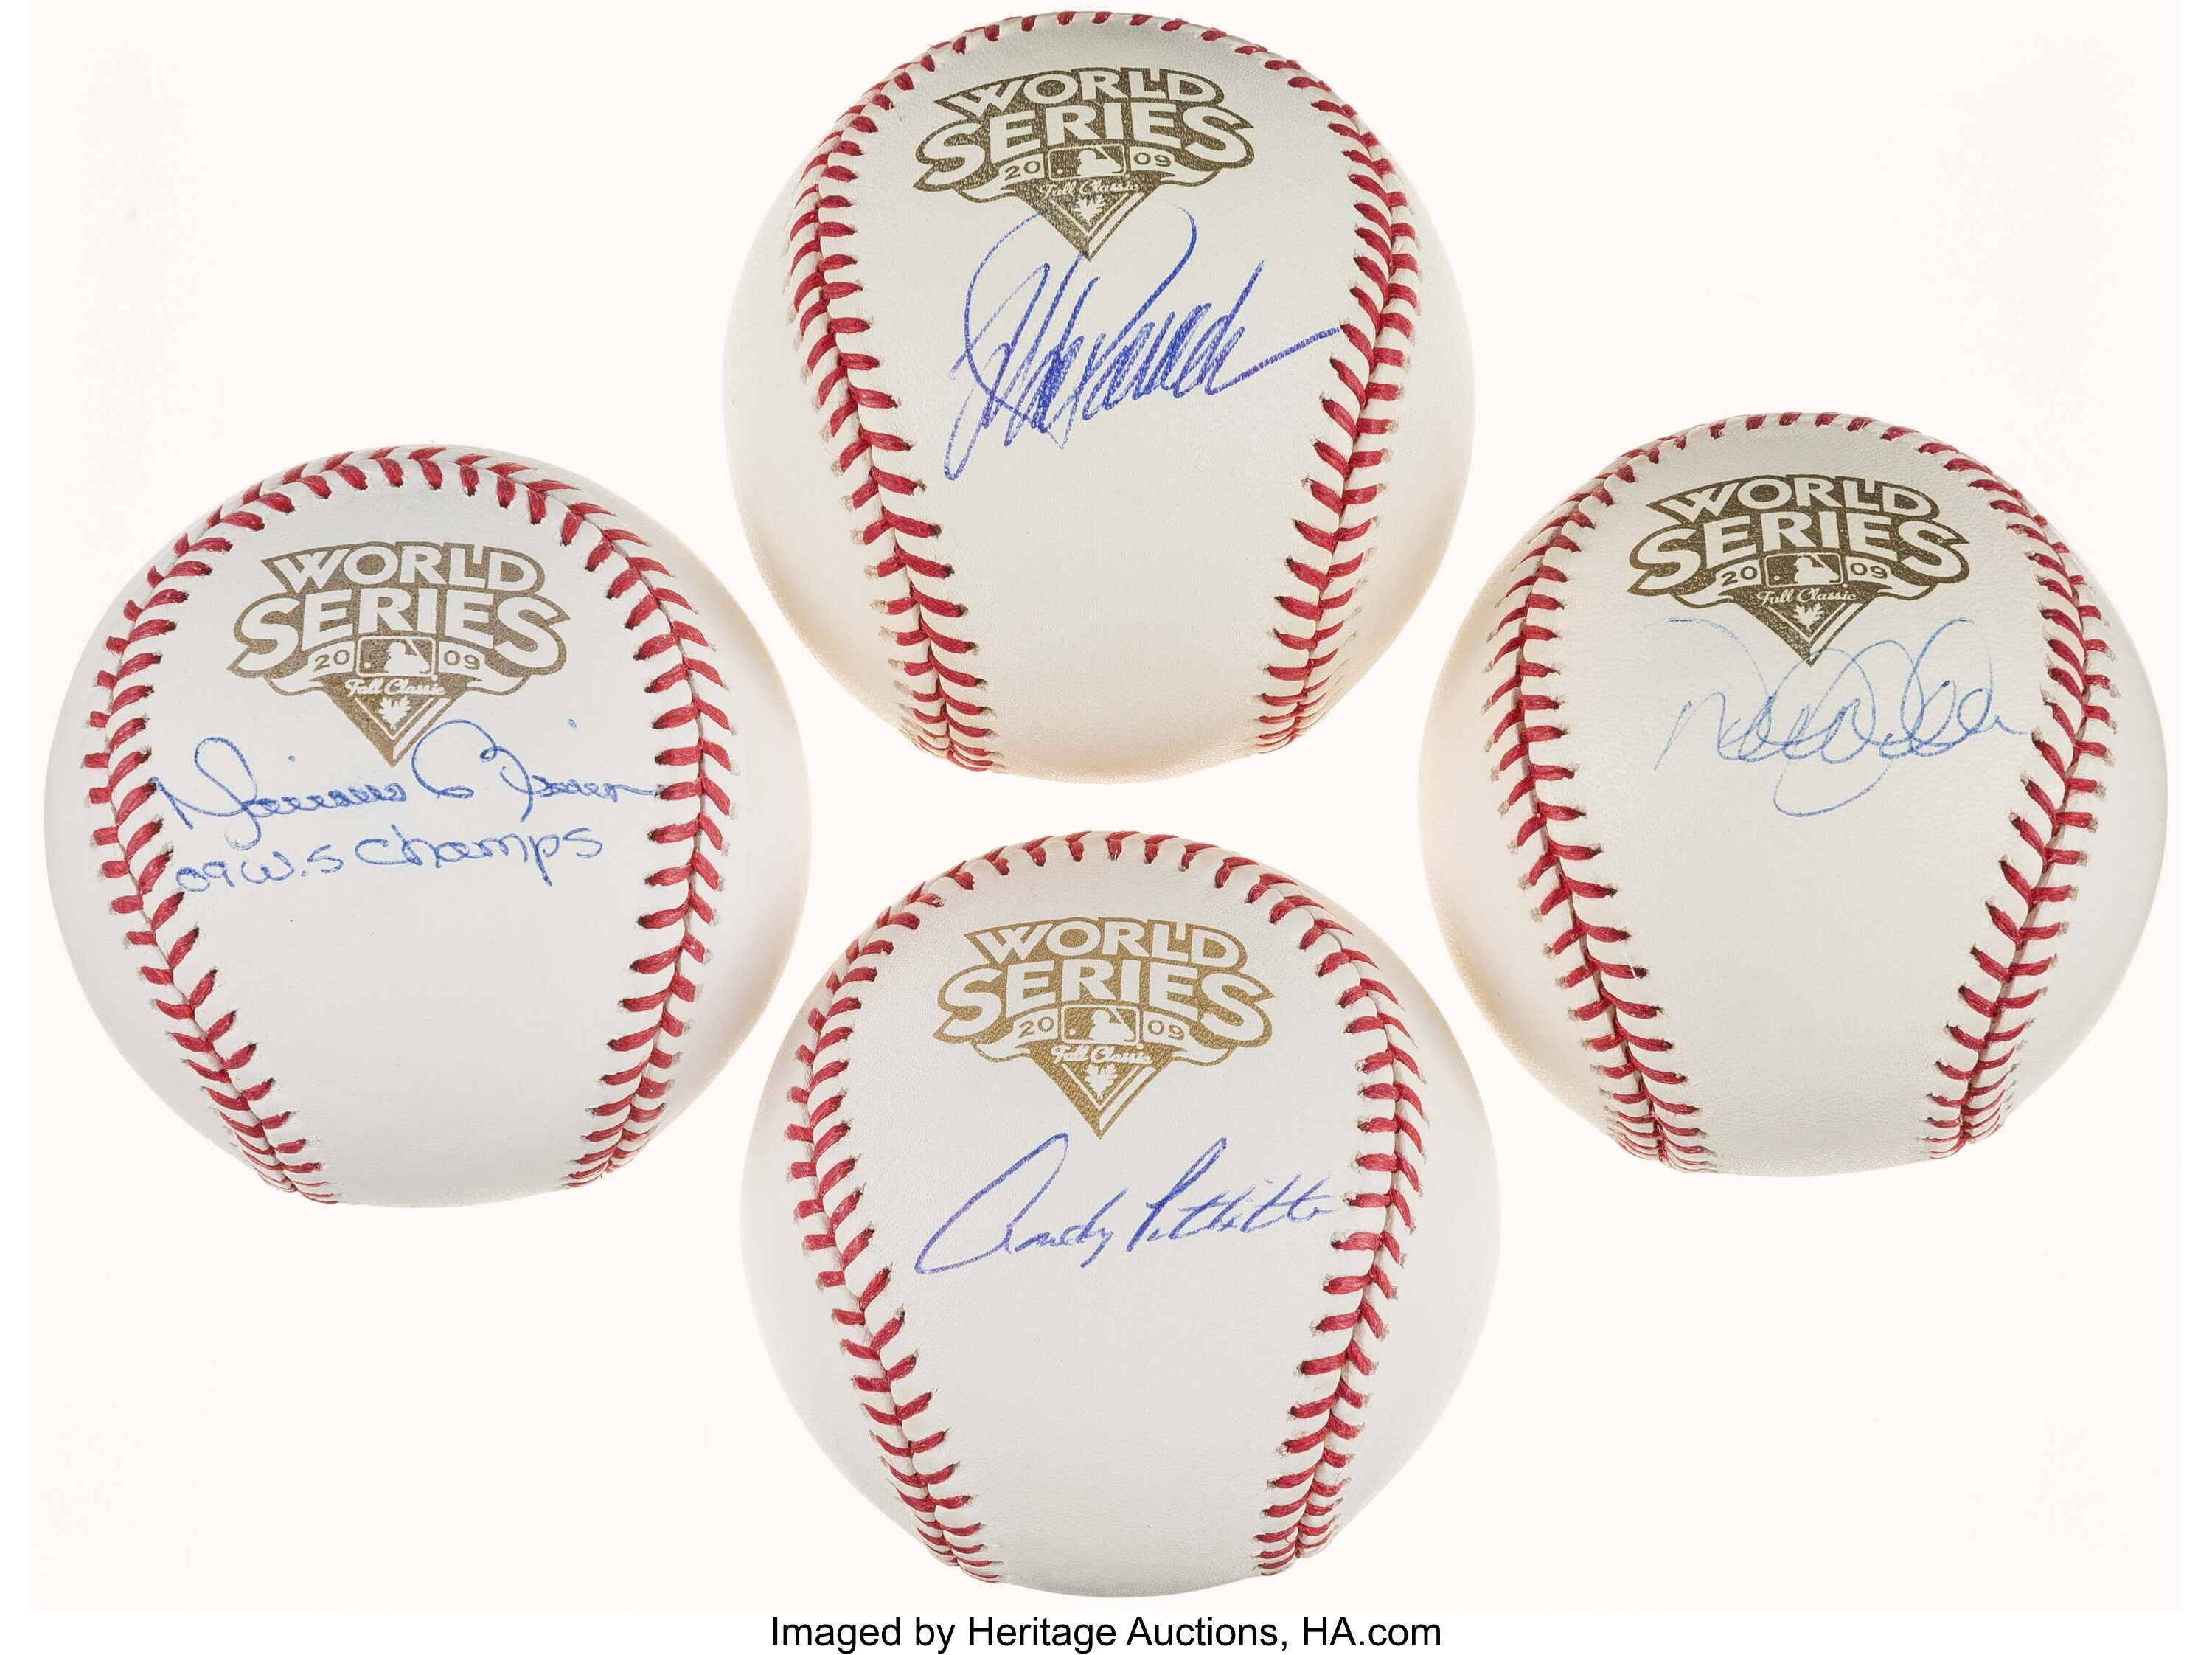 Charitybuzz: New York Yankees The Core Four Signed World Series